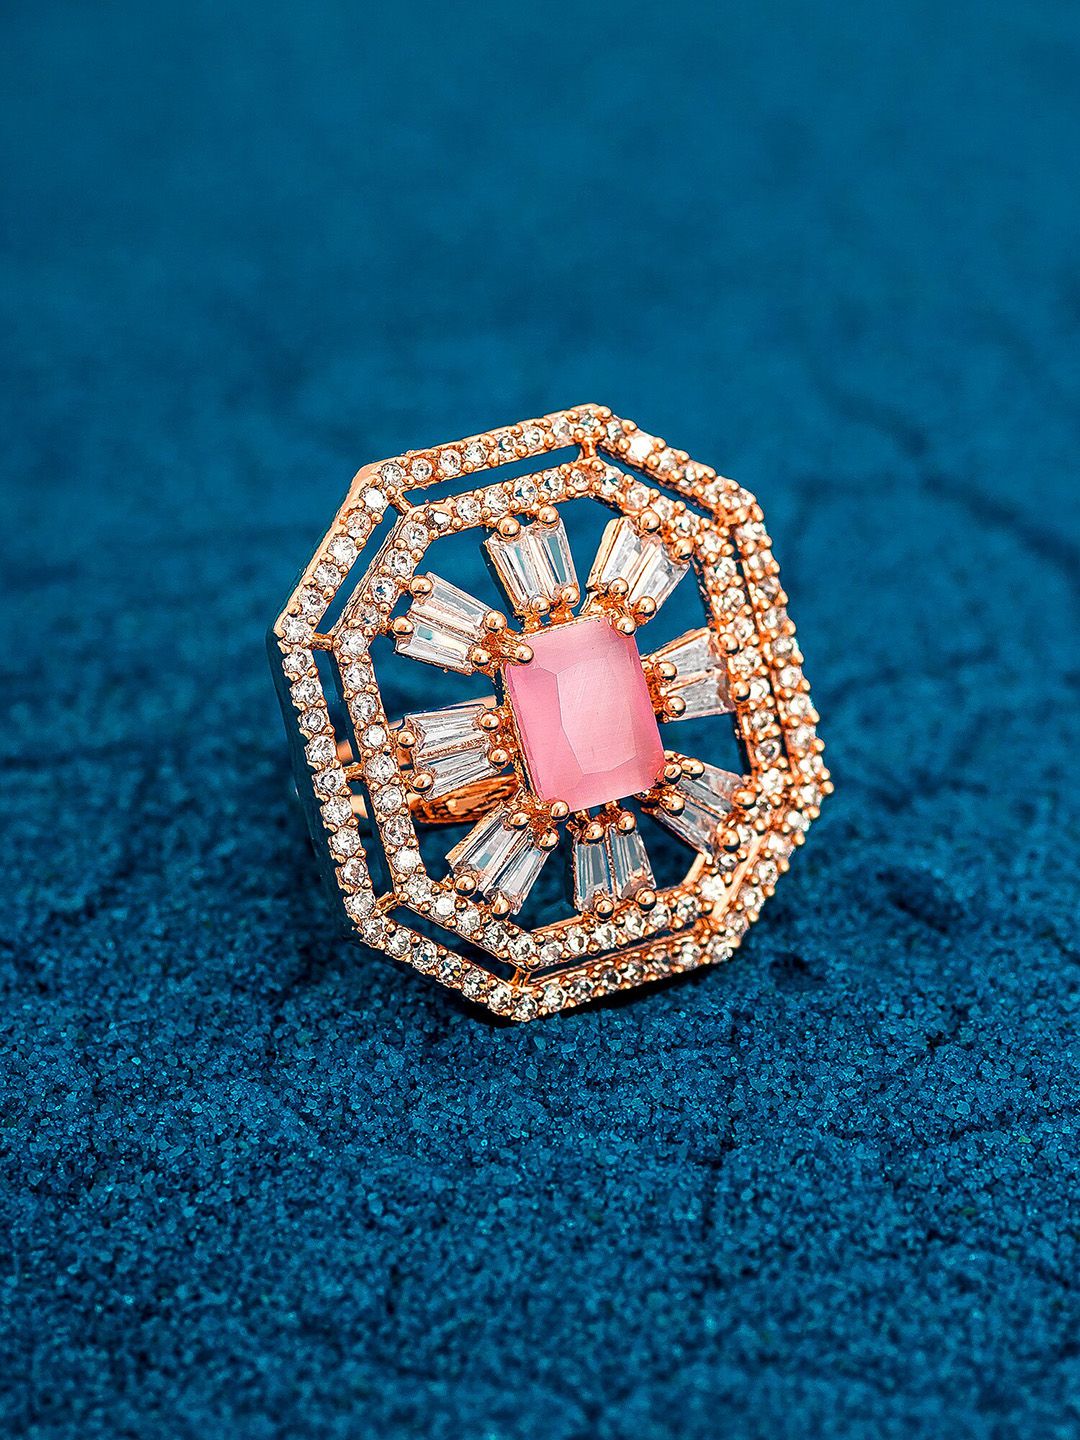 aadita 18K Gold-Plated White & Pink AD-Studded Adjustable Finger Ring Price in India